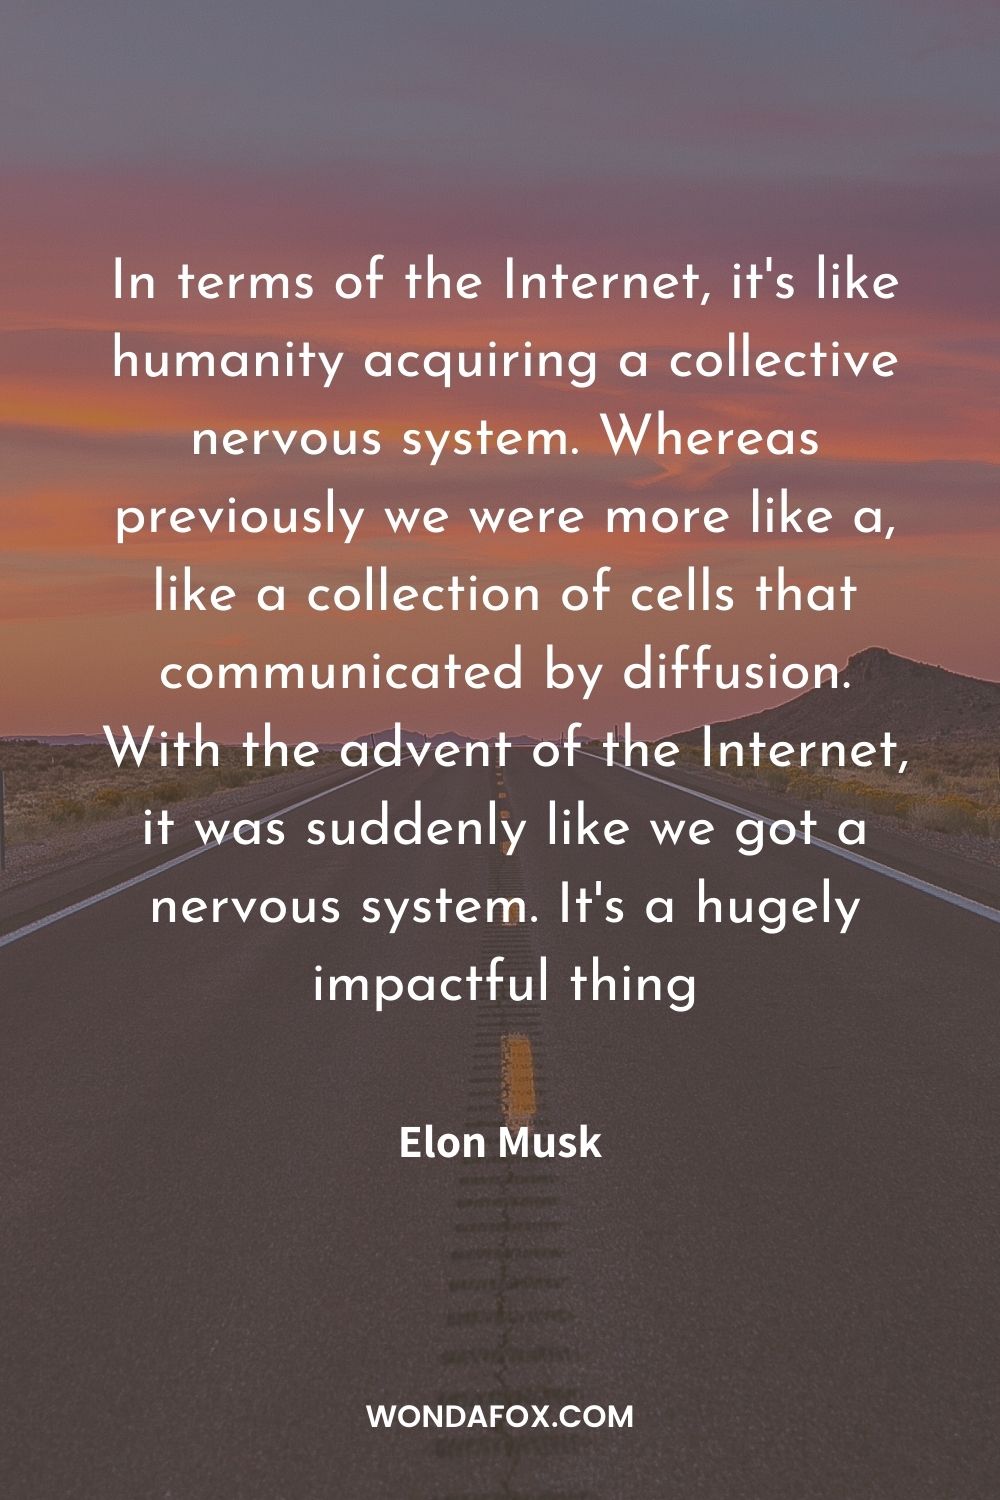 In terms of the Internet, it's like humanity acquiring a collective nervous system. Whereas previously we were more like a, like a collection of cells that communicated by diffusion. With the advent of the Internet, it was suddenly like we got a nervous system. It's a hugely impactful thing